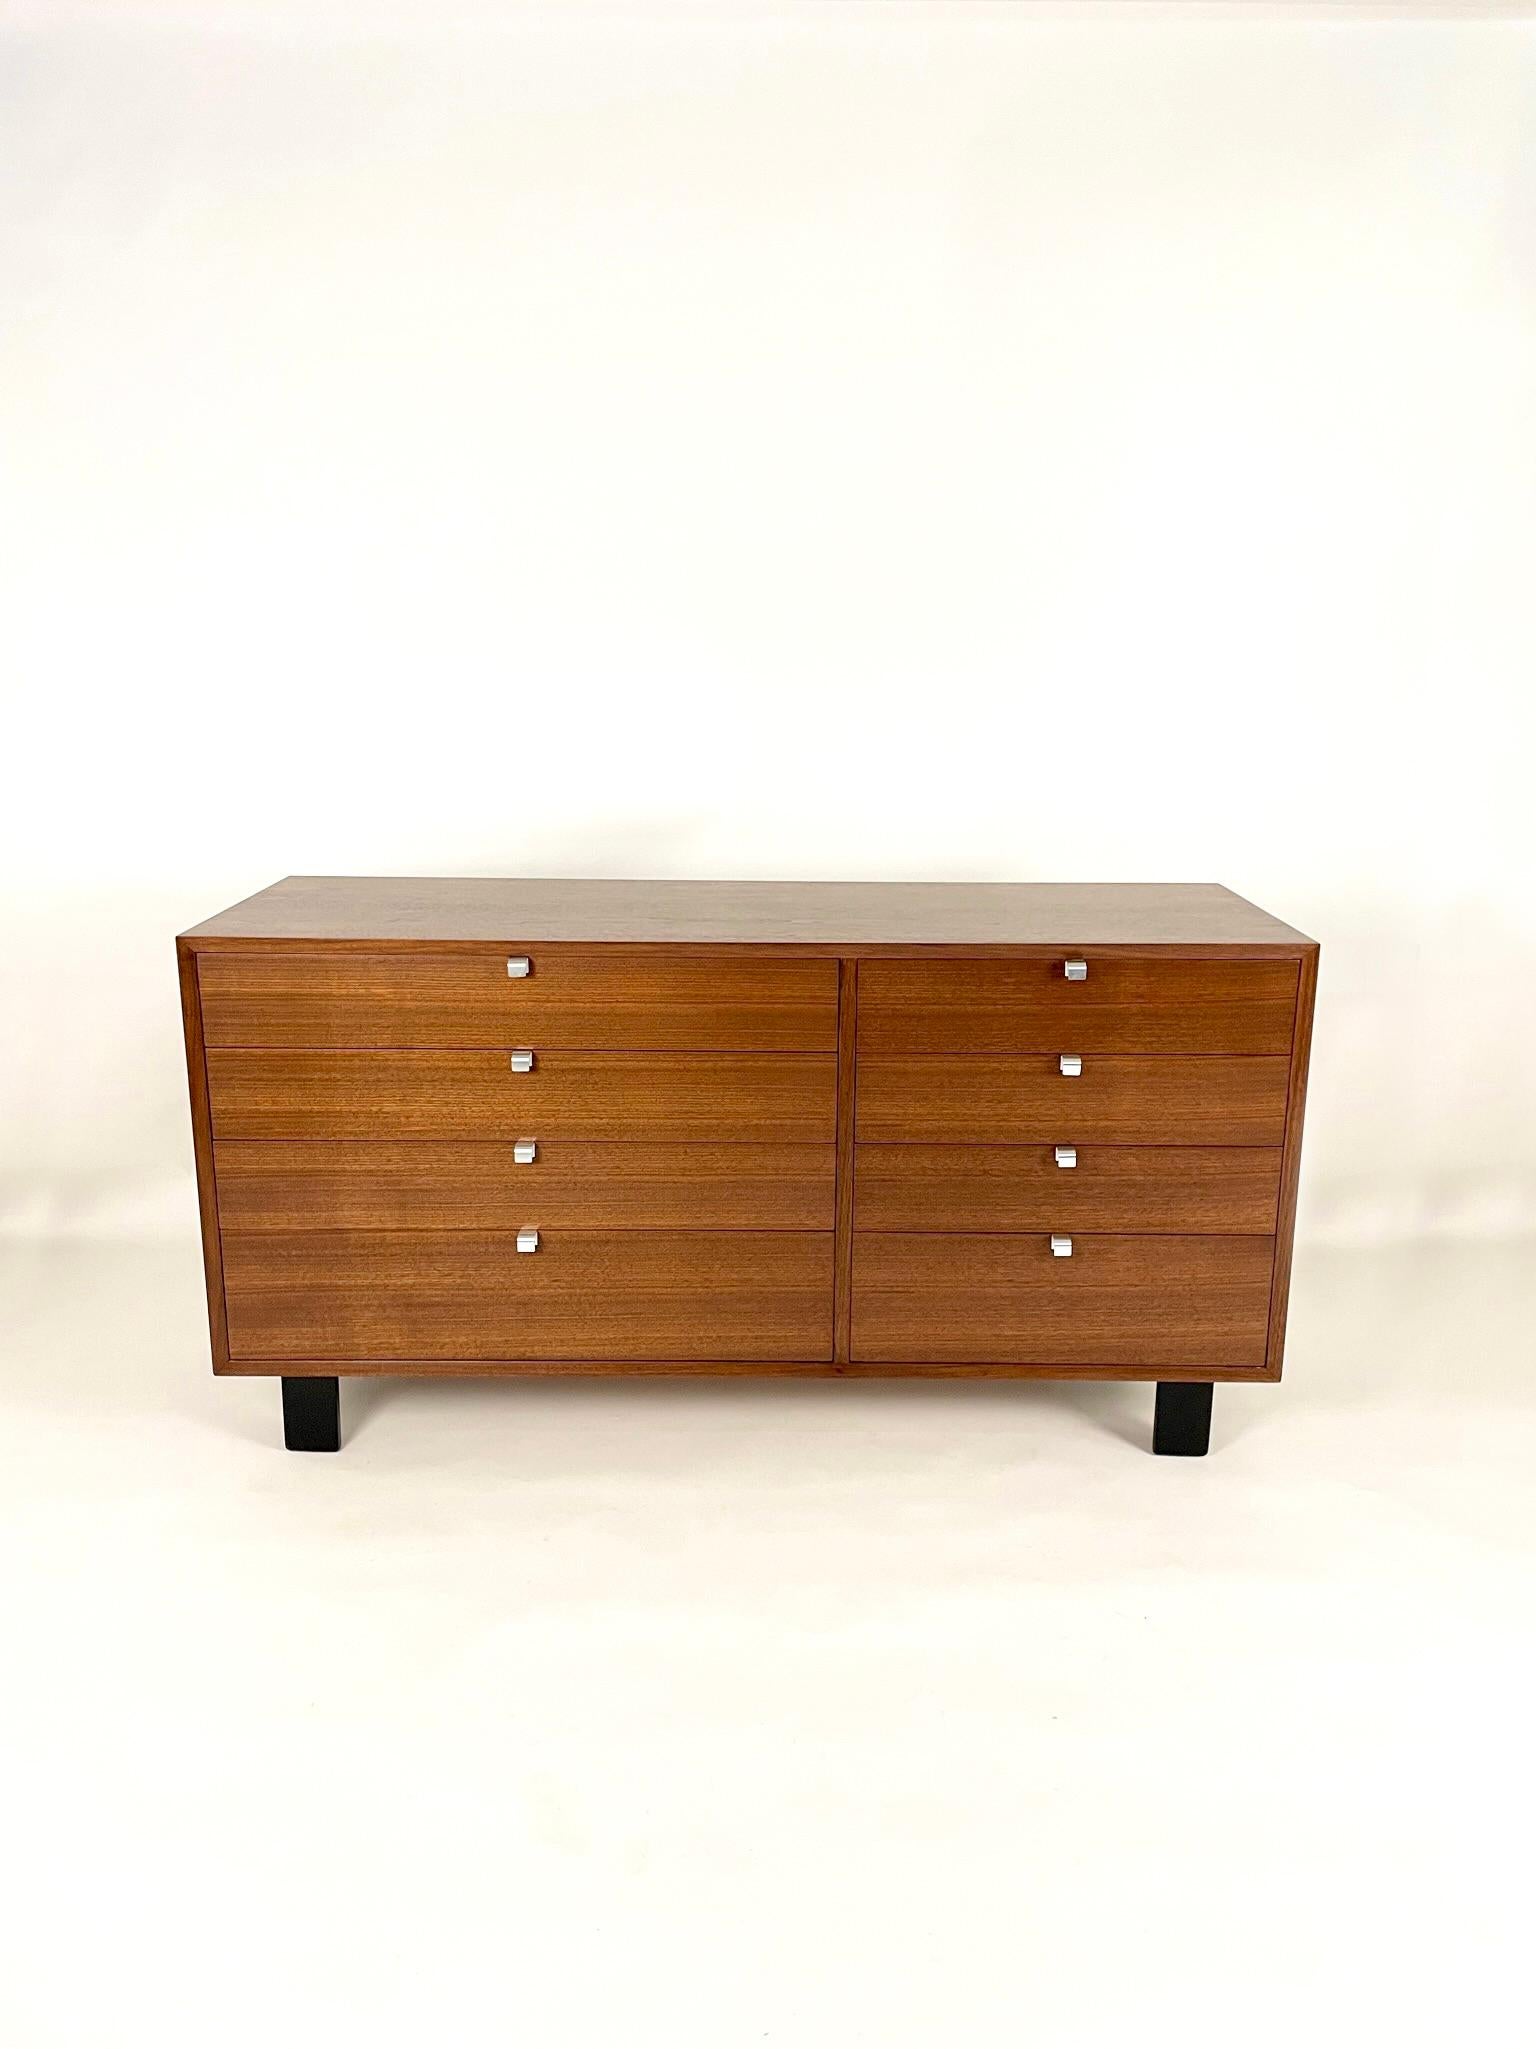 American George Nelson for Herman Miller Walnut Dresser Credenzas '2 Available'